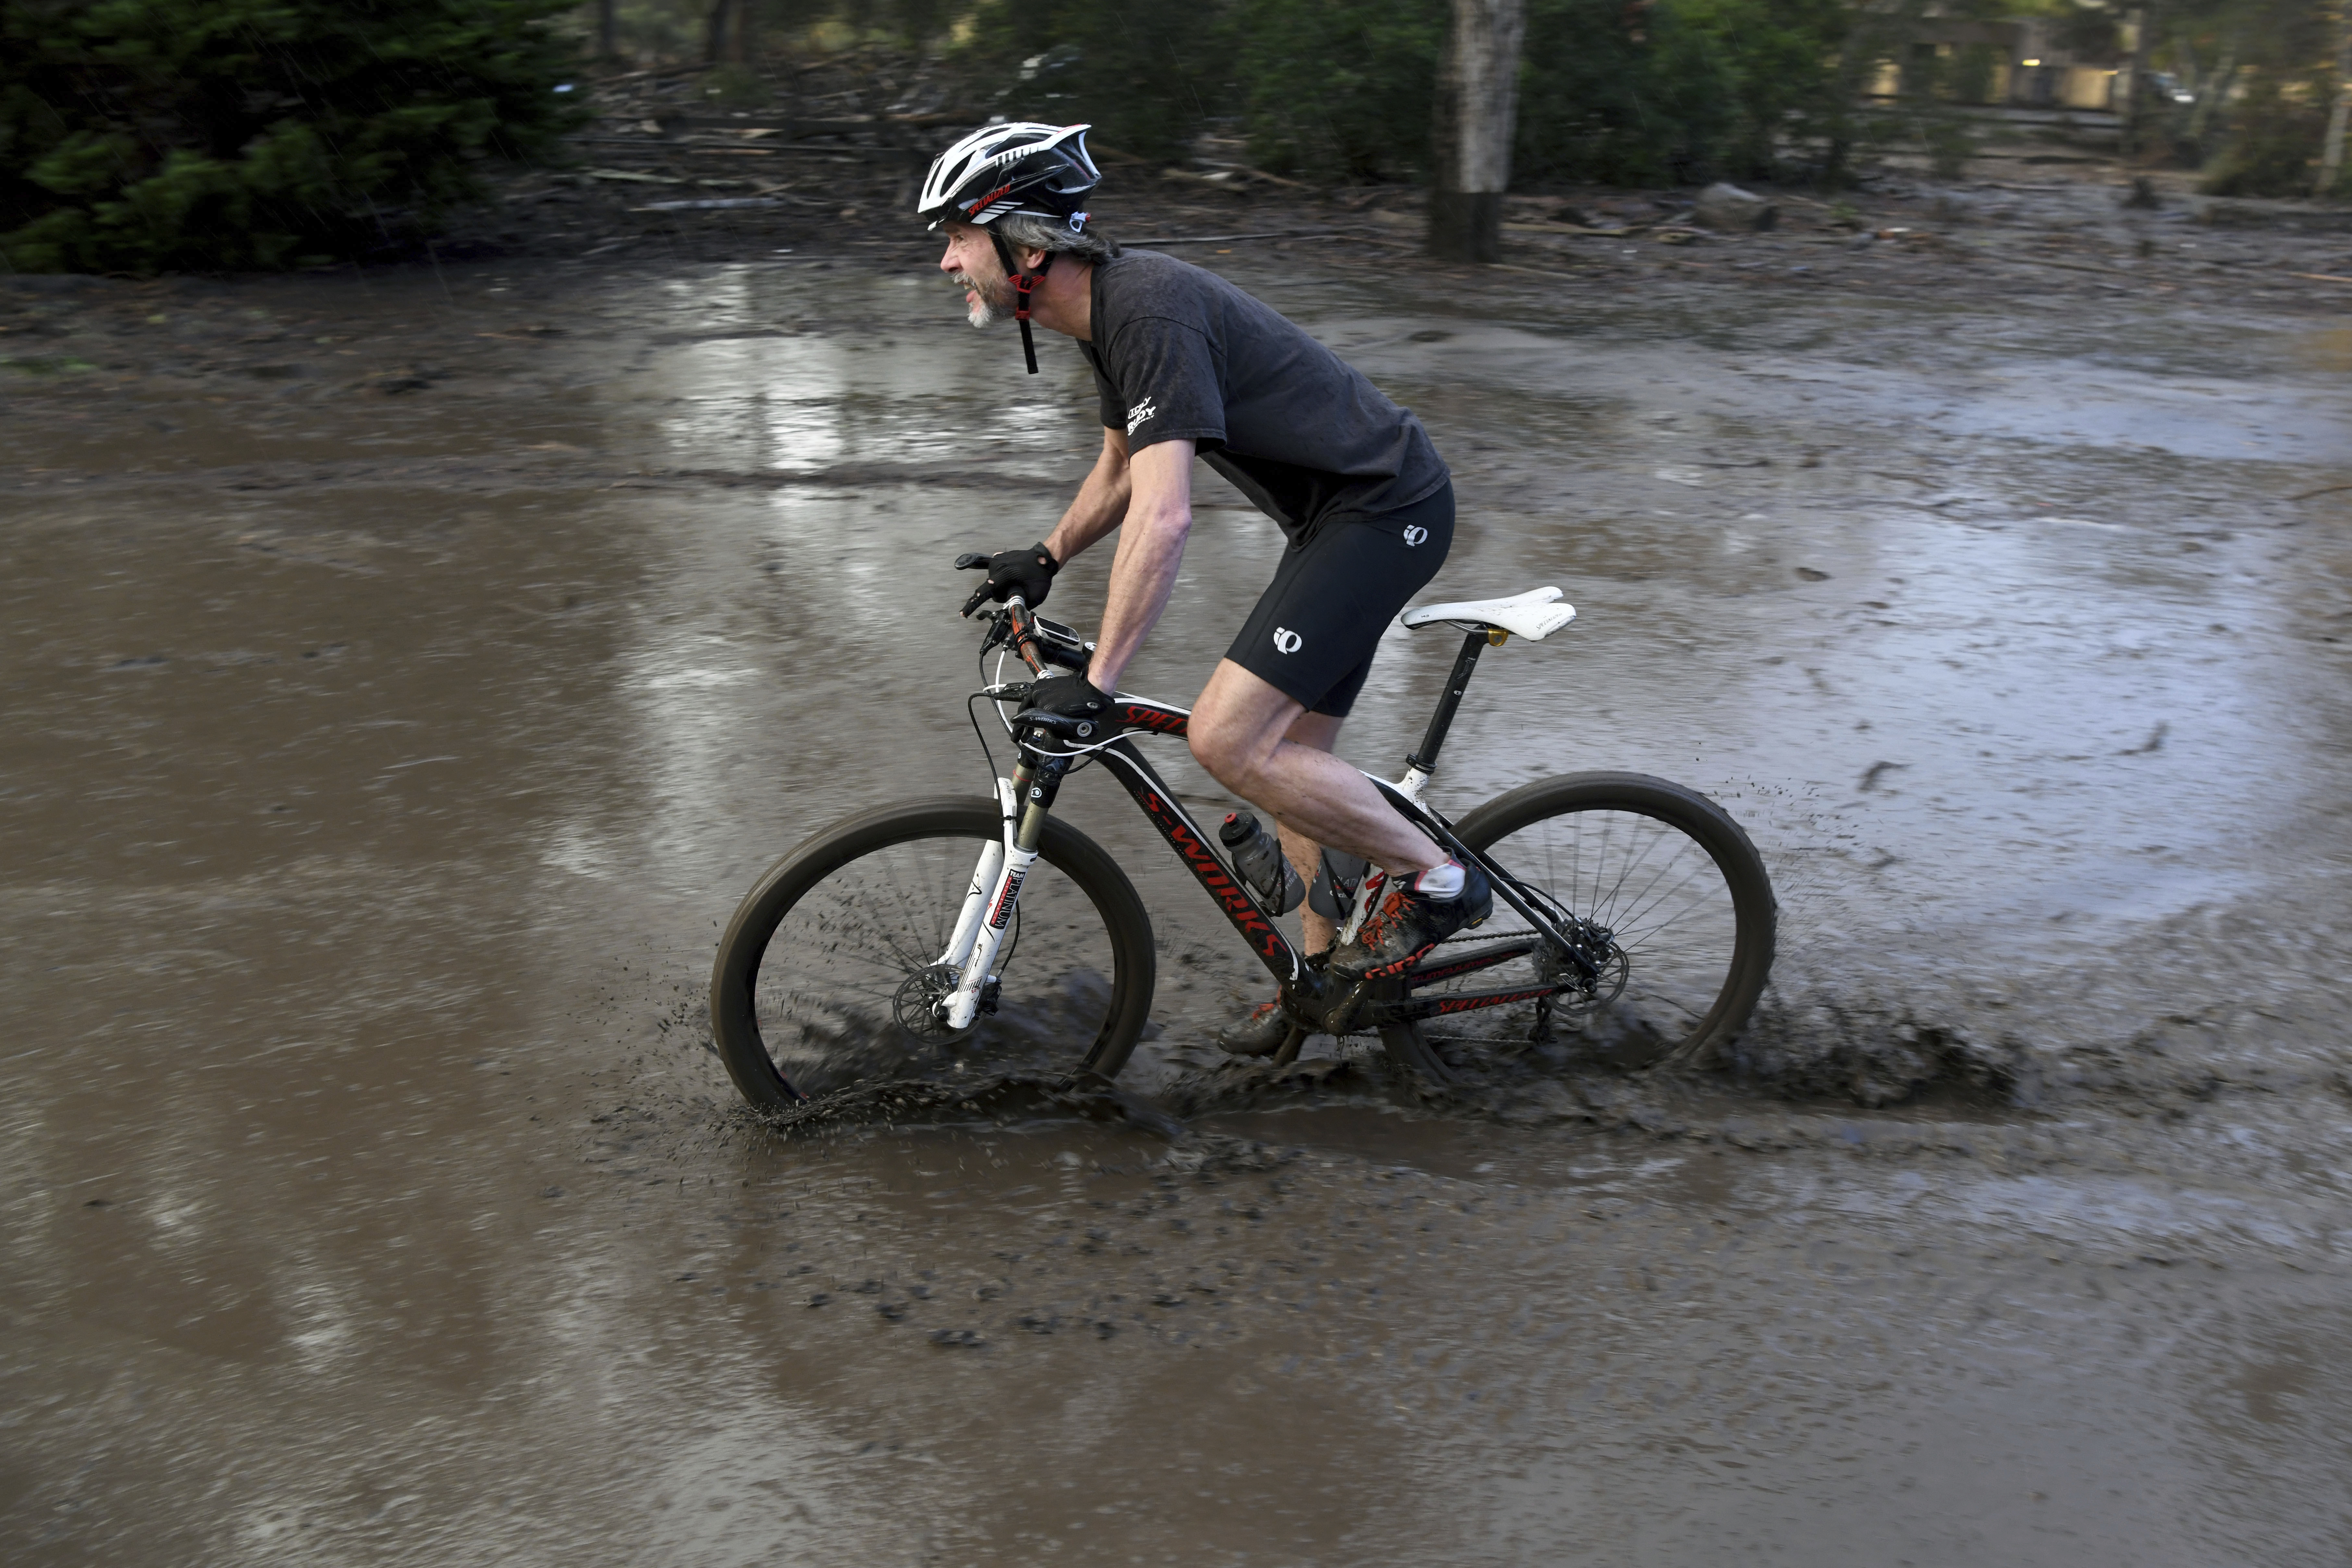 A man who gave his name only as Ian rides his bike through a mud puddle in Montecito, Calif., Tuesday, Jan. 9, 2018. More than a dozen people were killed and homes were torn from their foundations Tuesday as downpours sent mud and boulders roaring down hills stripped of vegetation by a wildfire that raged in Southern California last month. (AP Photo/Michael Owen Baker)